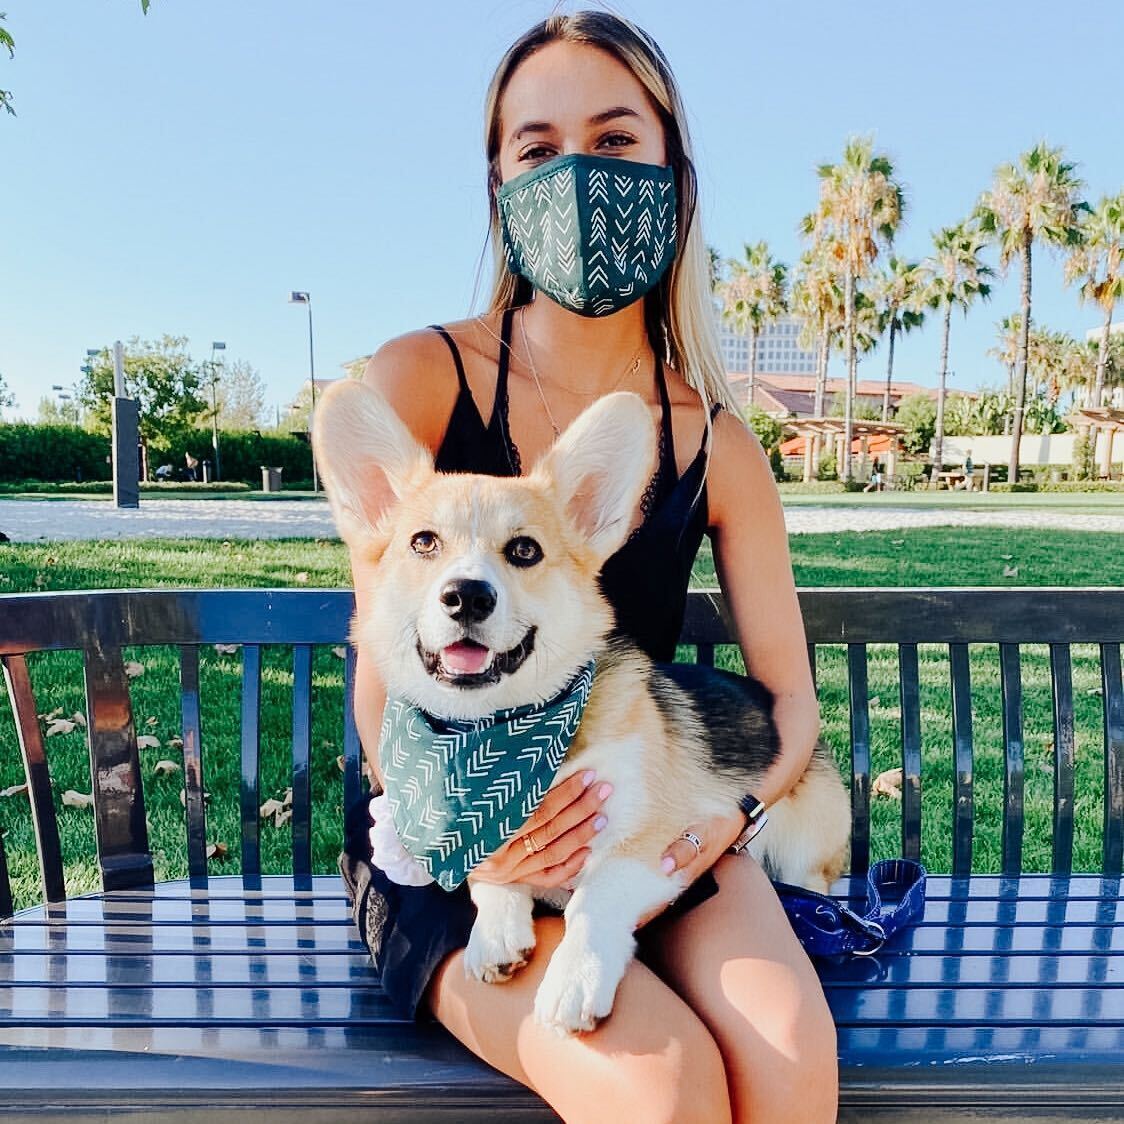 Bandana and facemask for twinning 10 Unique Luxury Gifts for Dogs That Amaze Everyone - 15